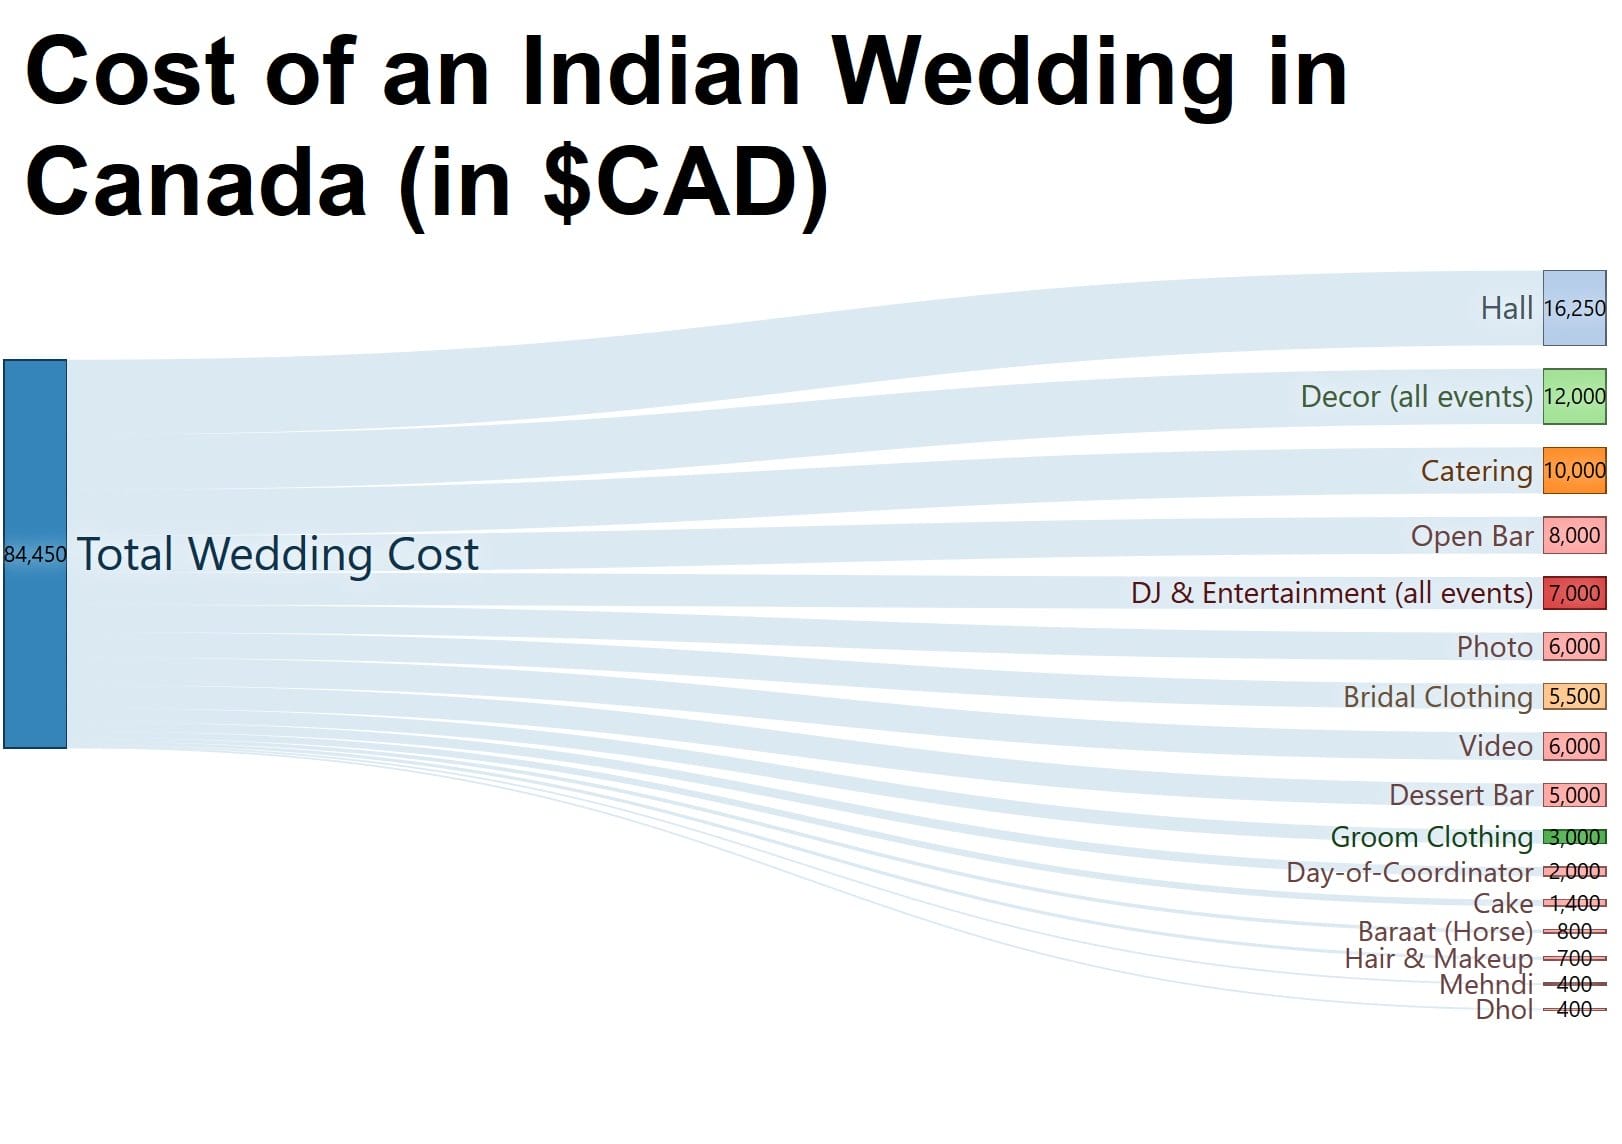 Cost of an Indian Wedding in Canada